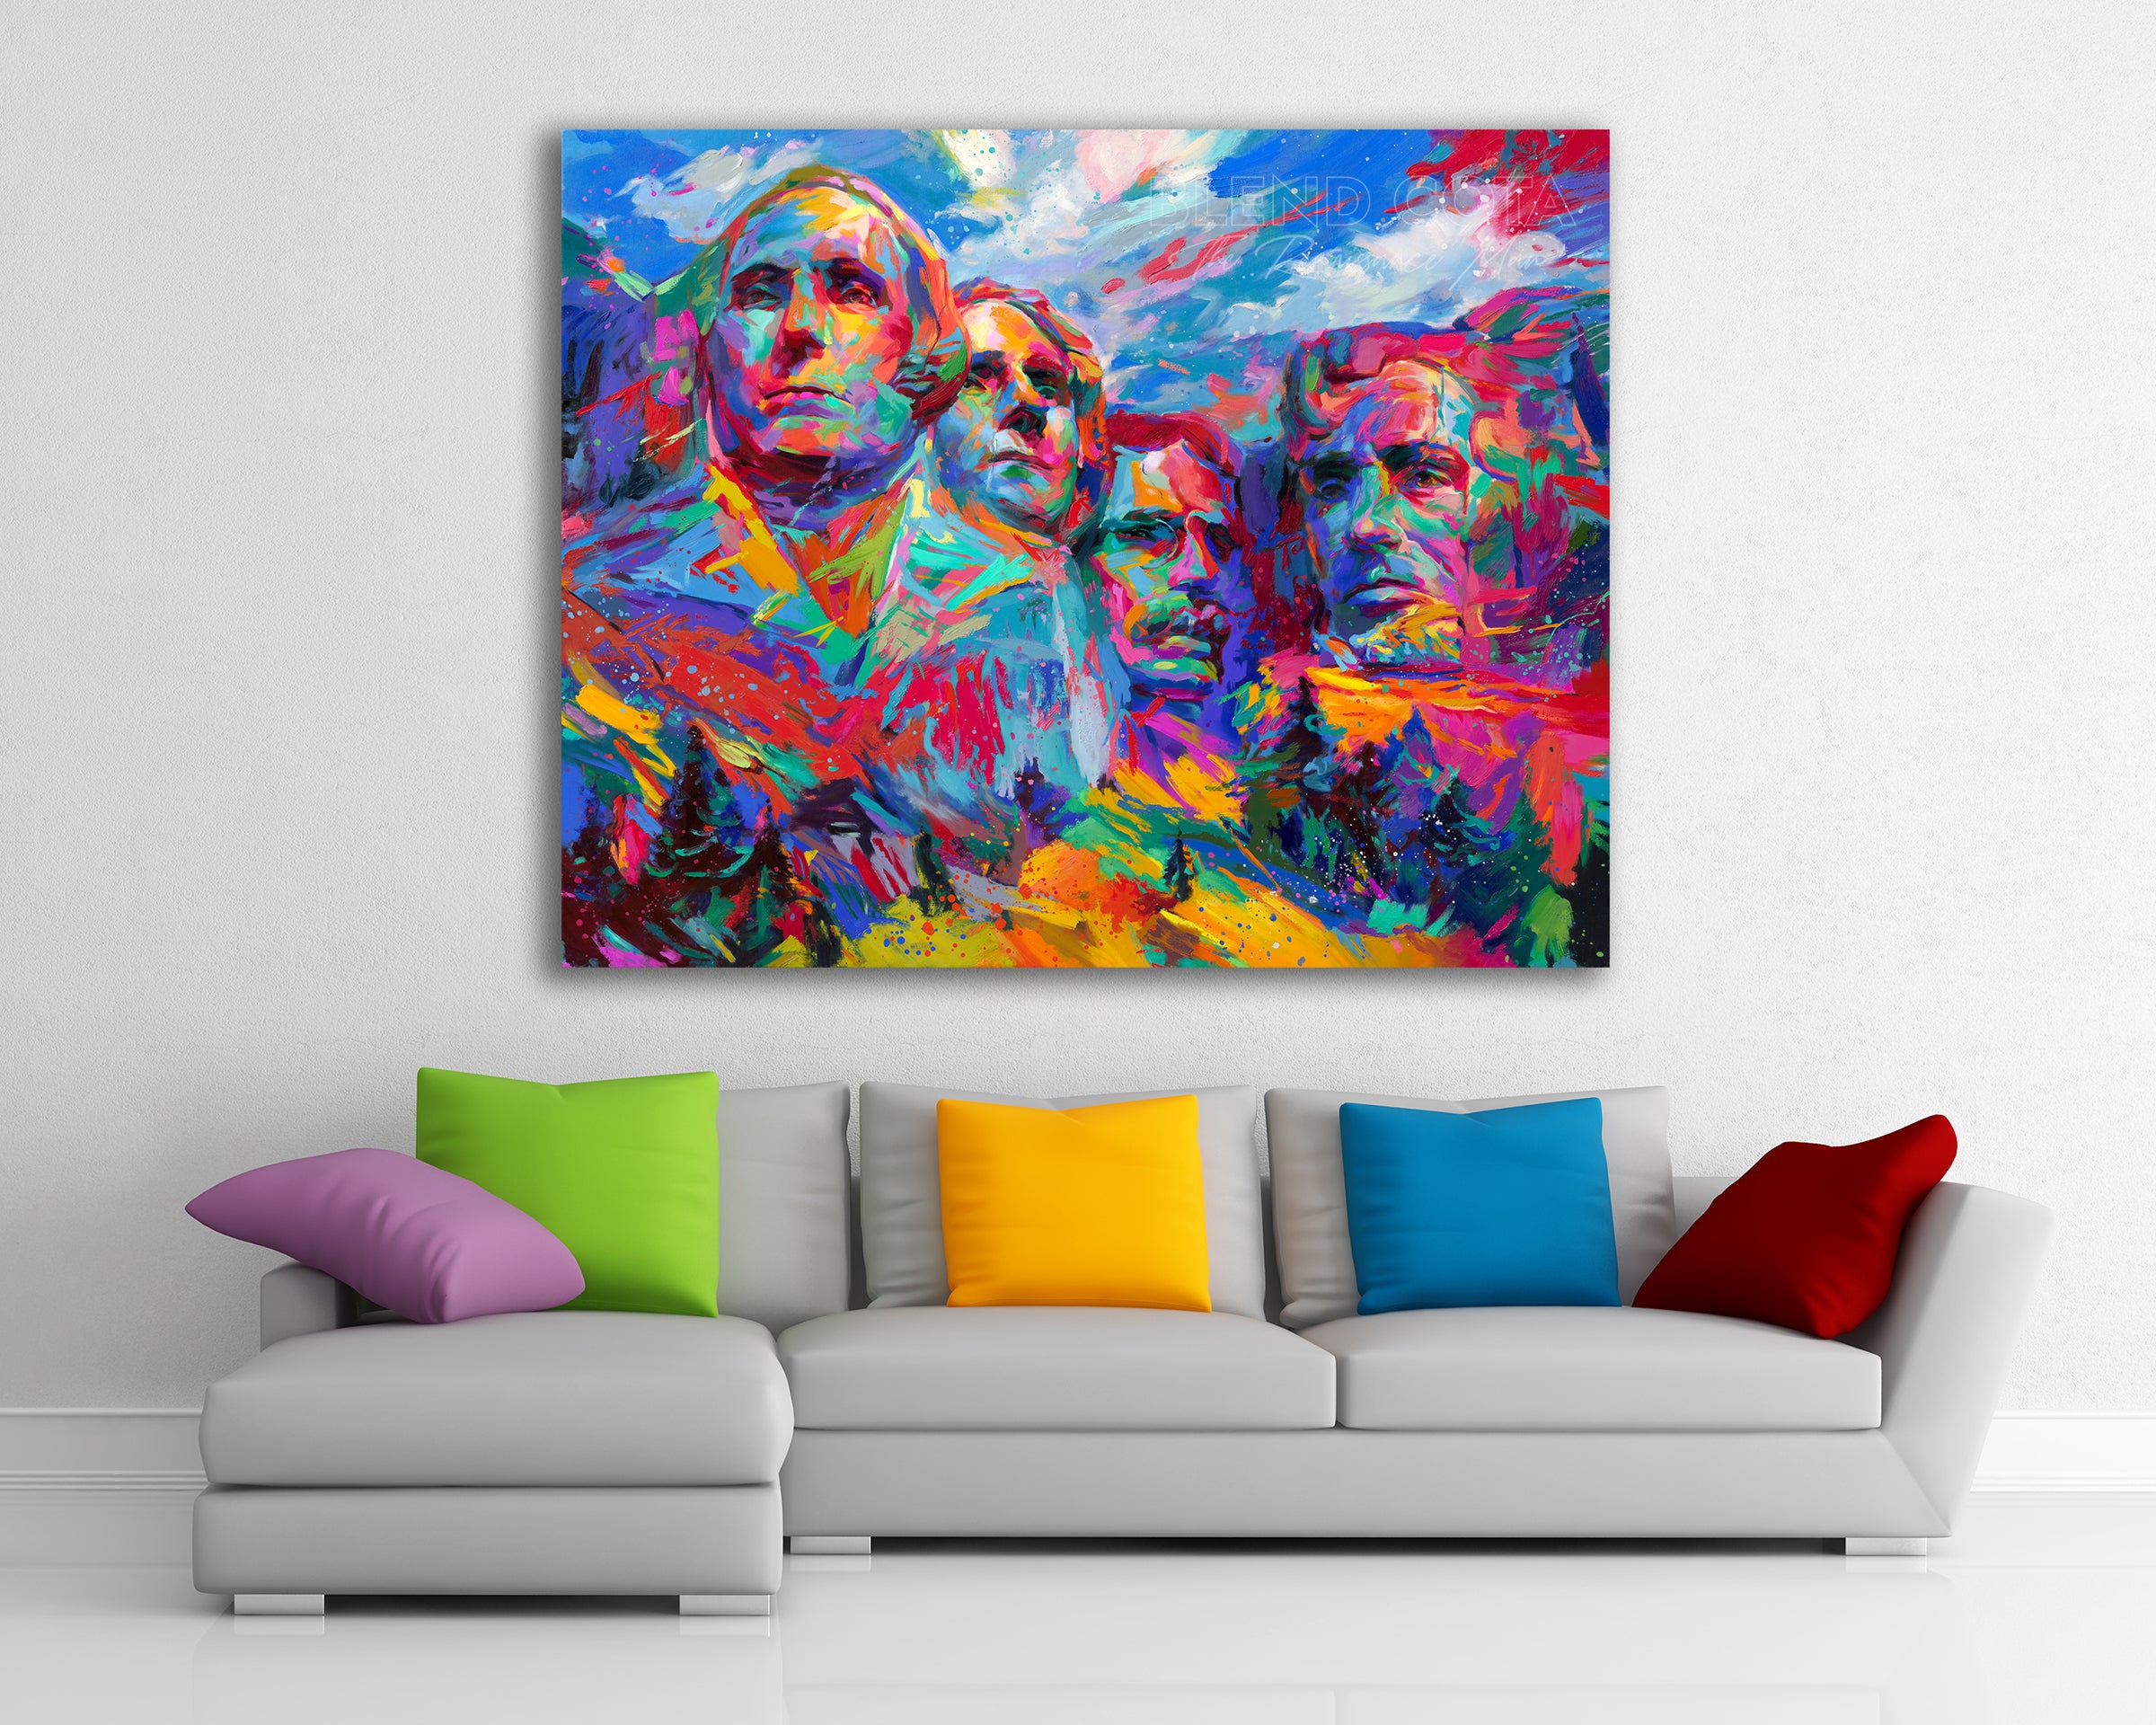 Mount Rushmore | Hope For a Brighter Future painted by Blend Cota original oil painting from Blend Cota Studios hanging on a white wall